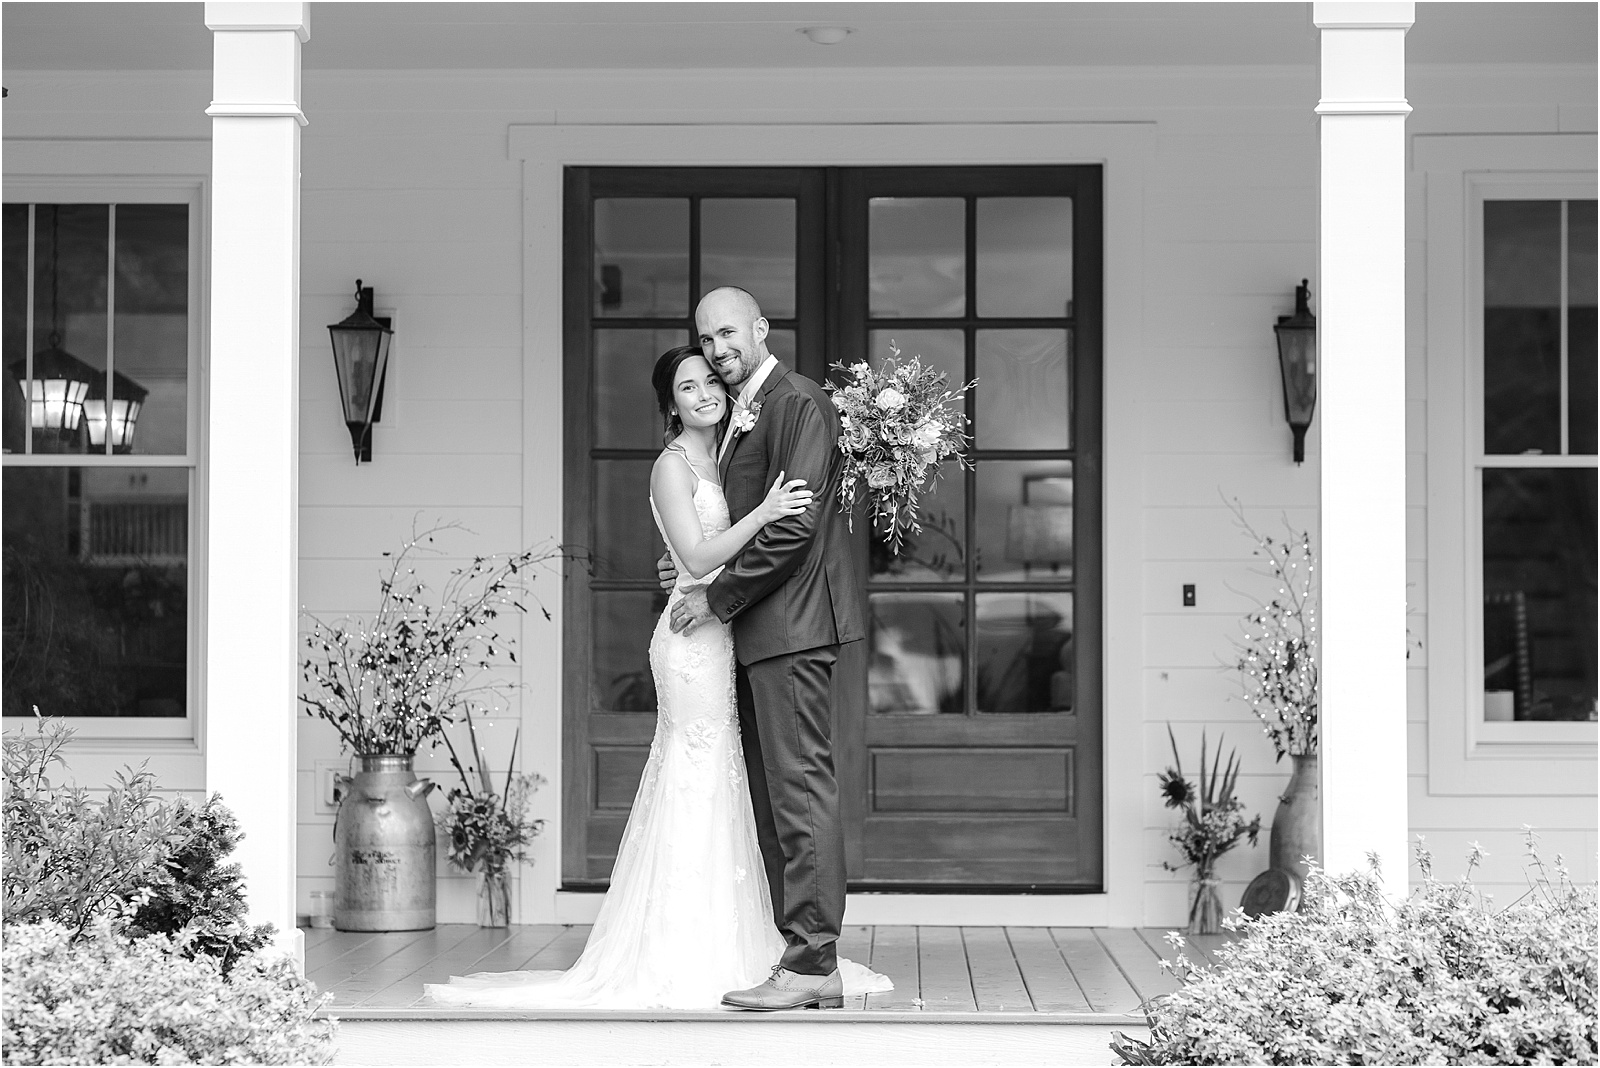 Groom with bride hugging on the porch of a house